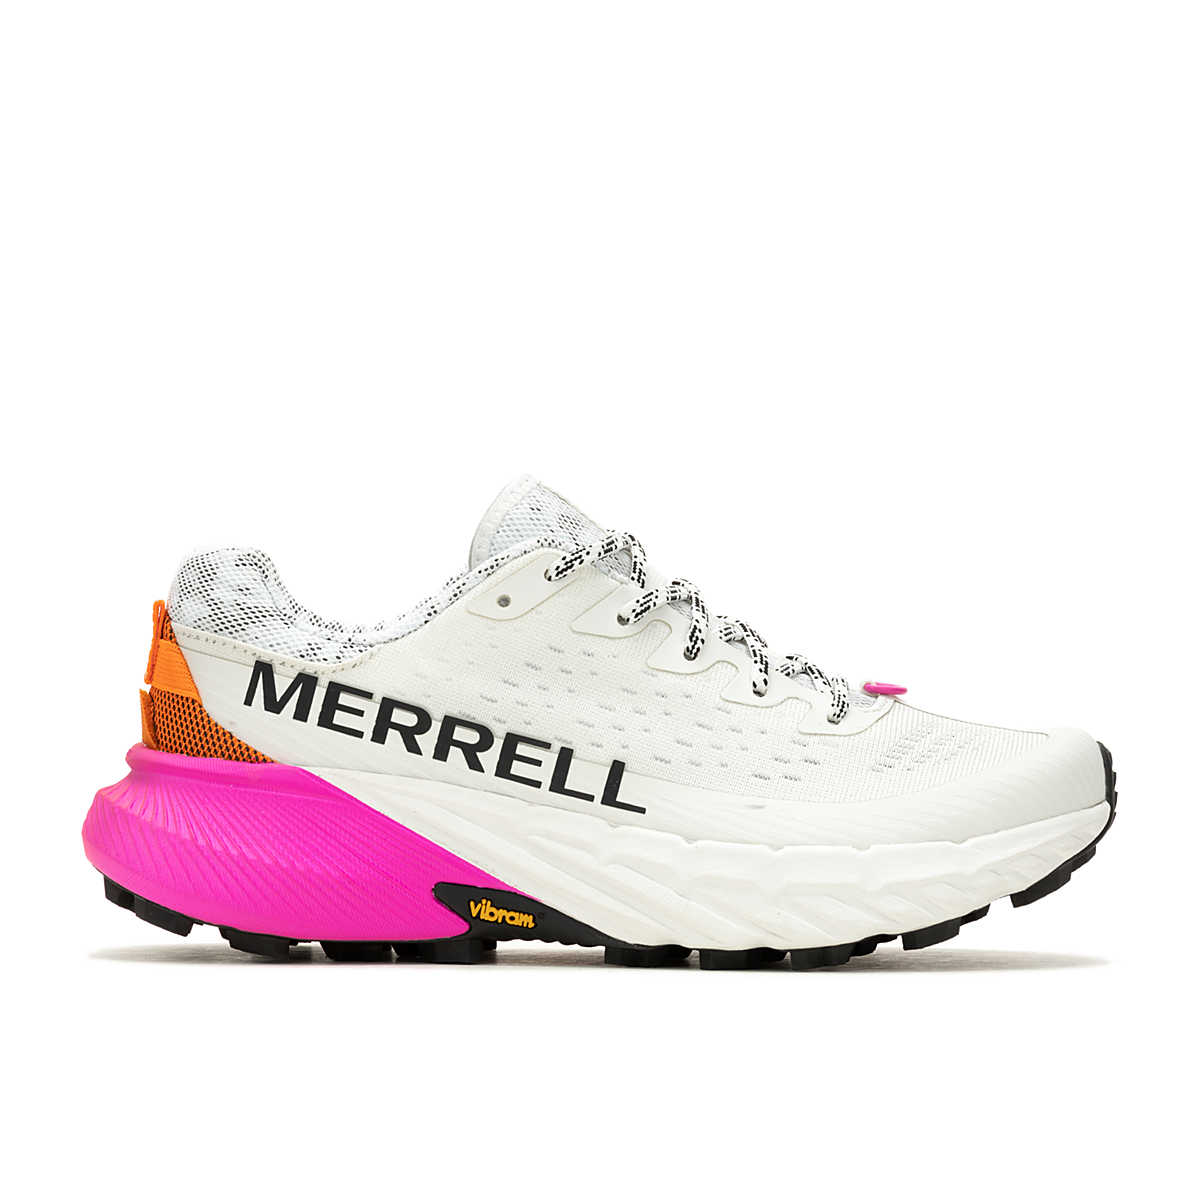 Merrell Women's Agility 5 Trail Running Shoes